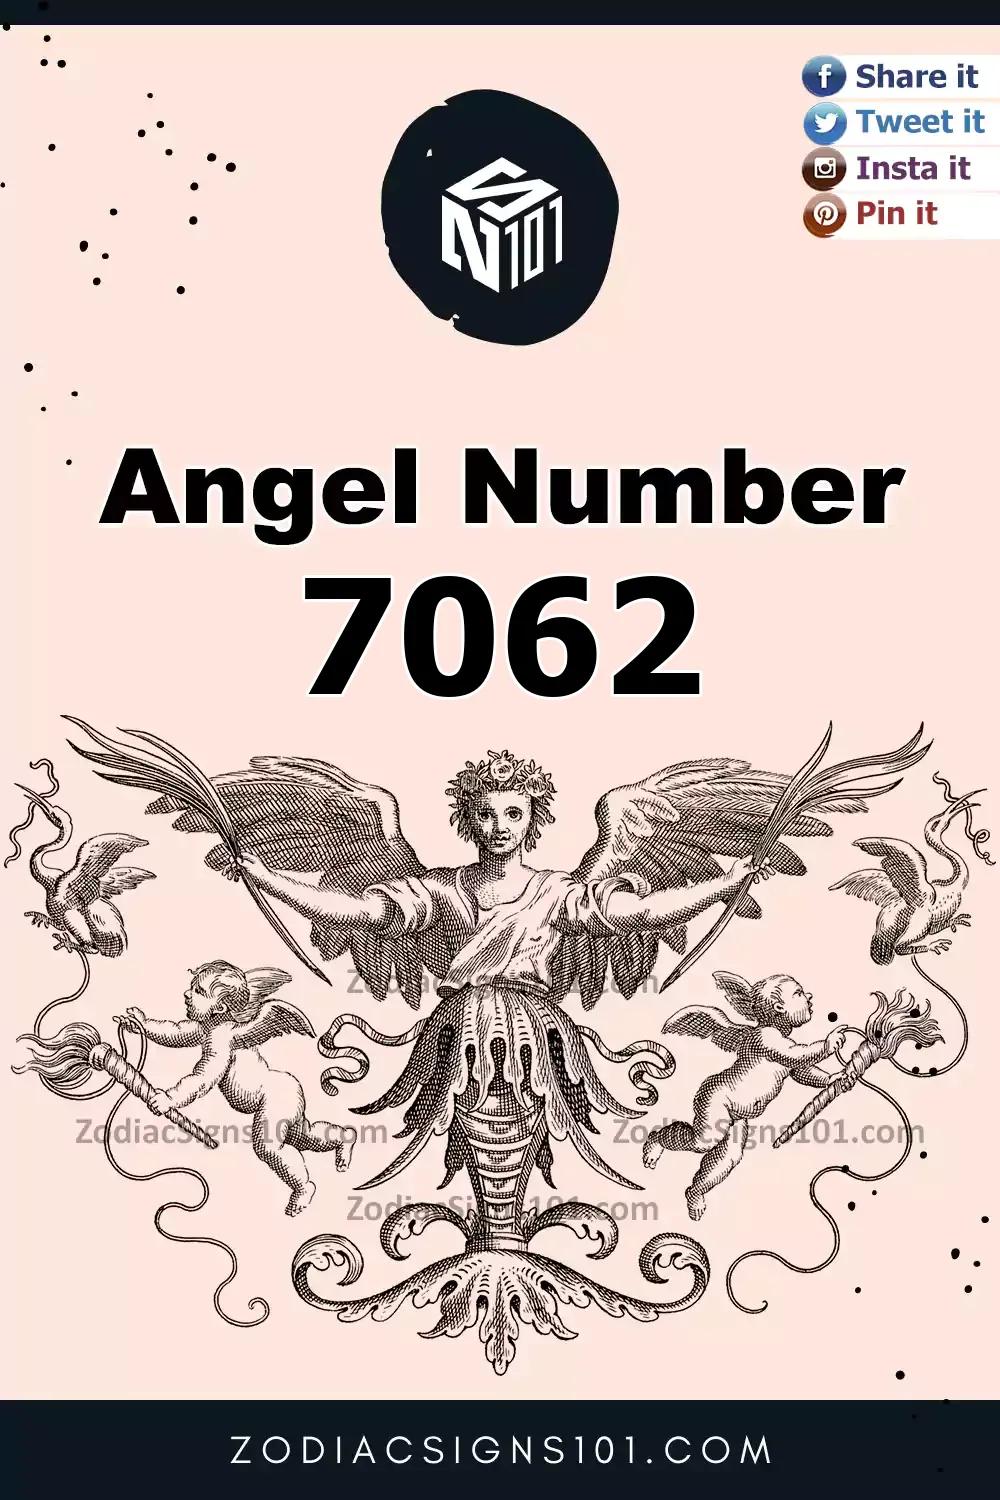 7062 Angel Number Meaning